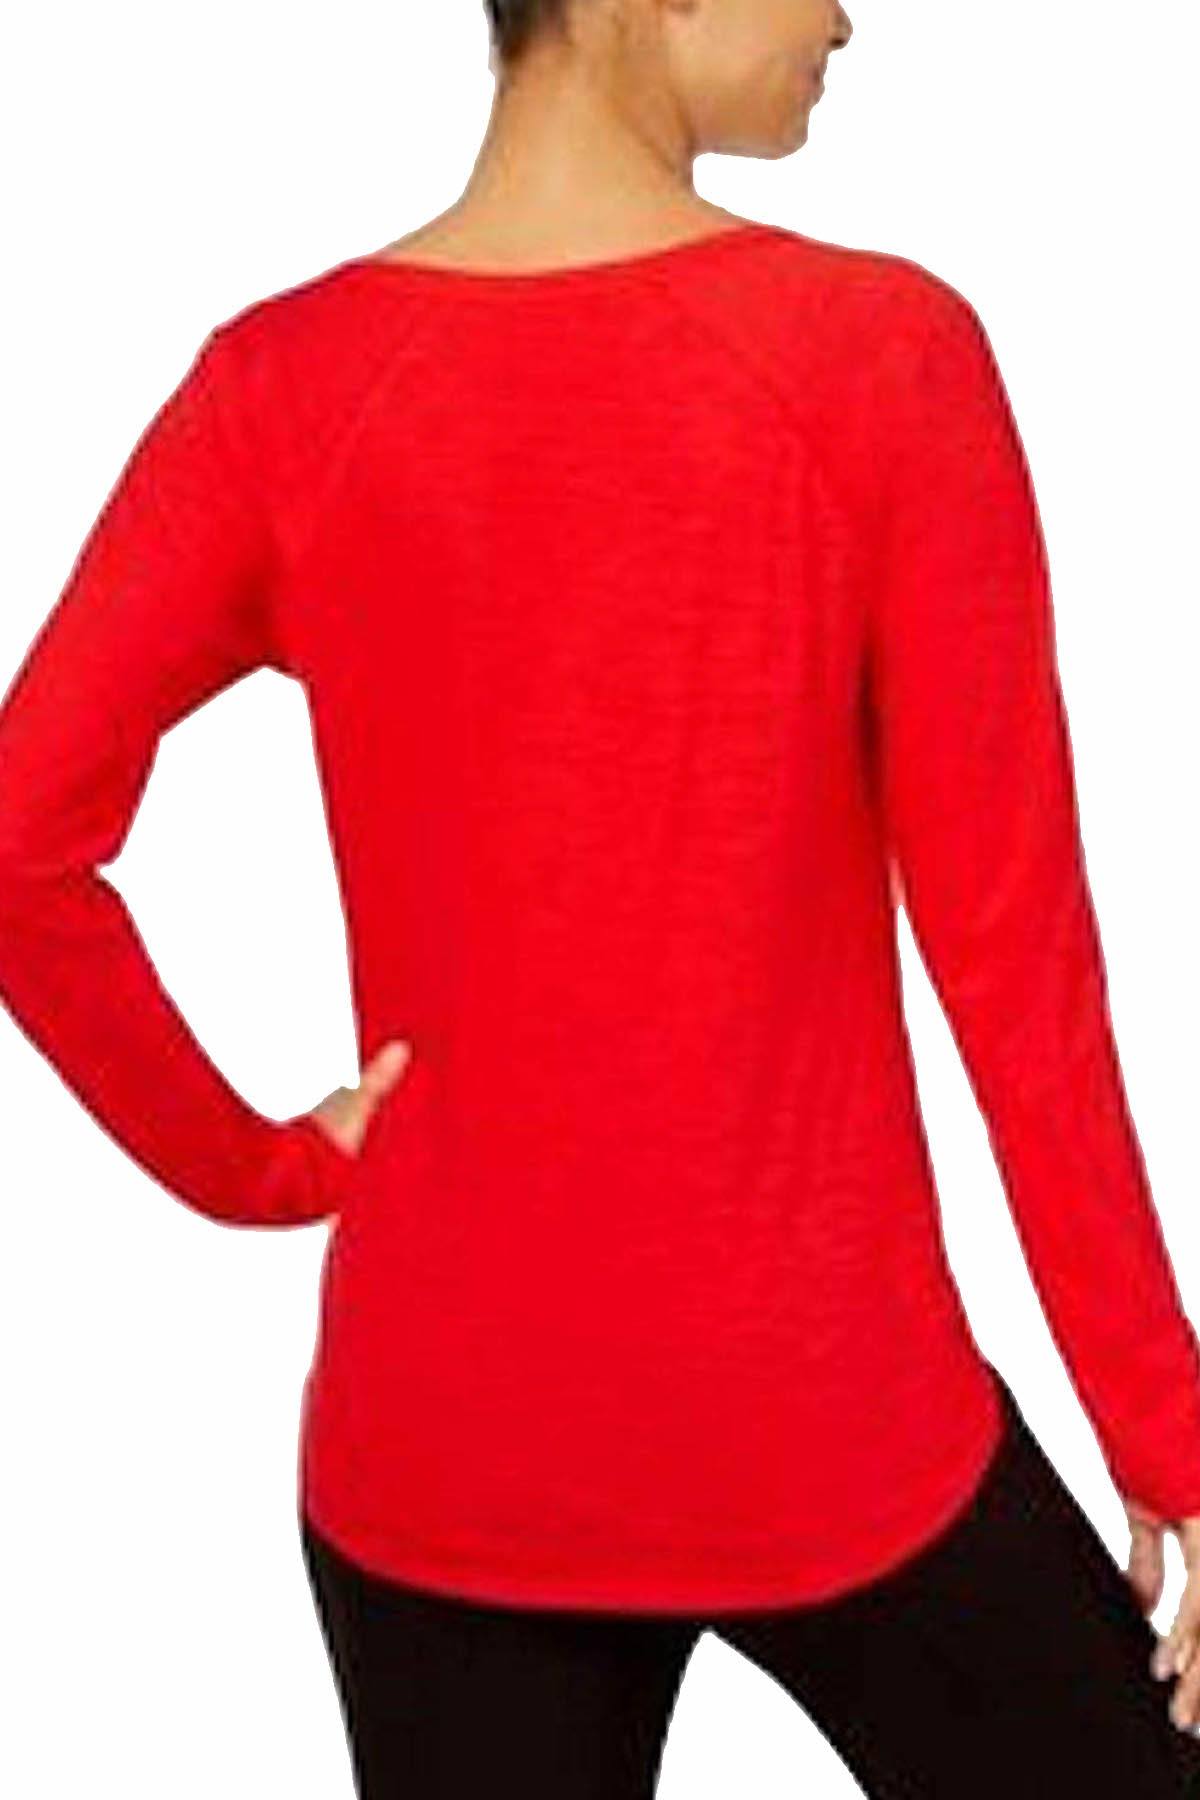 Jenni Graphic Print Henley in Coal Again Red